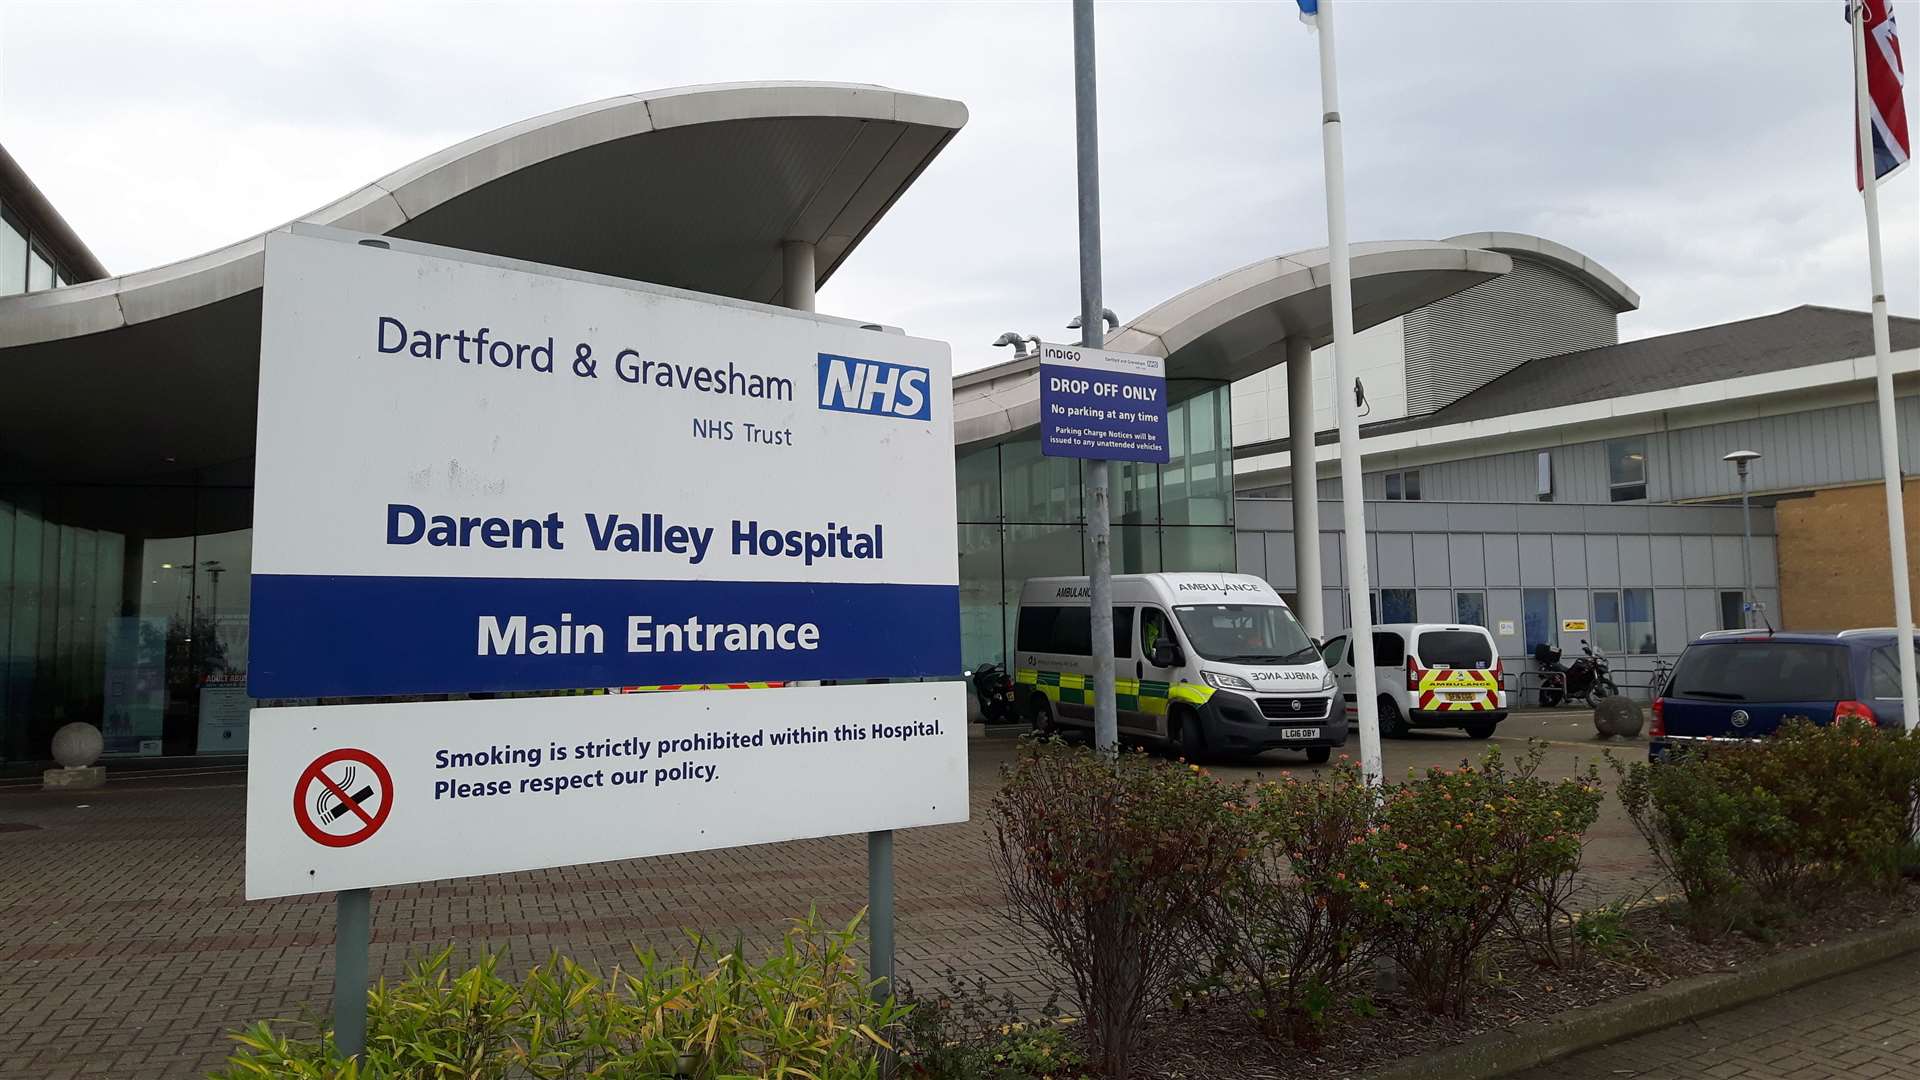 Were you near Darent Valley Hospital at the time the baby was found?